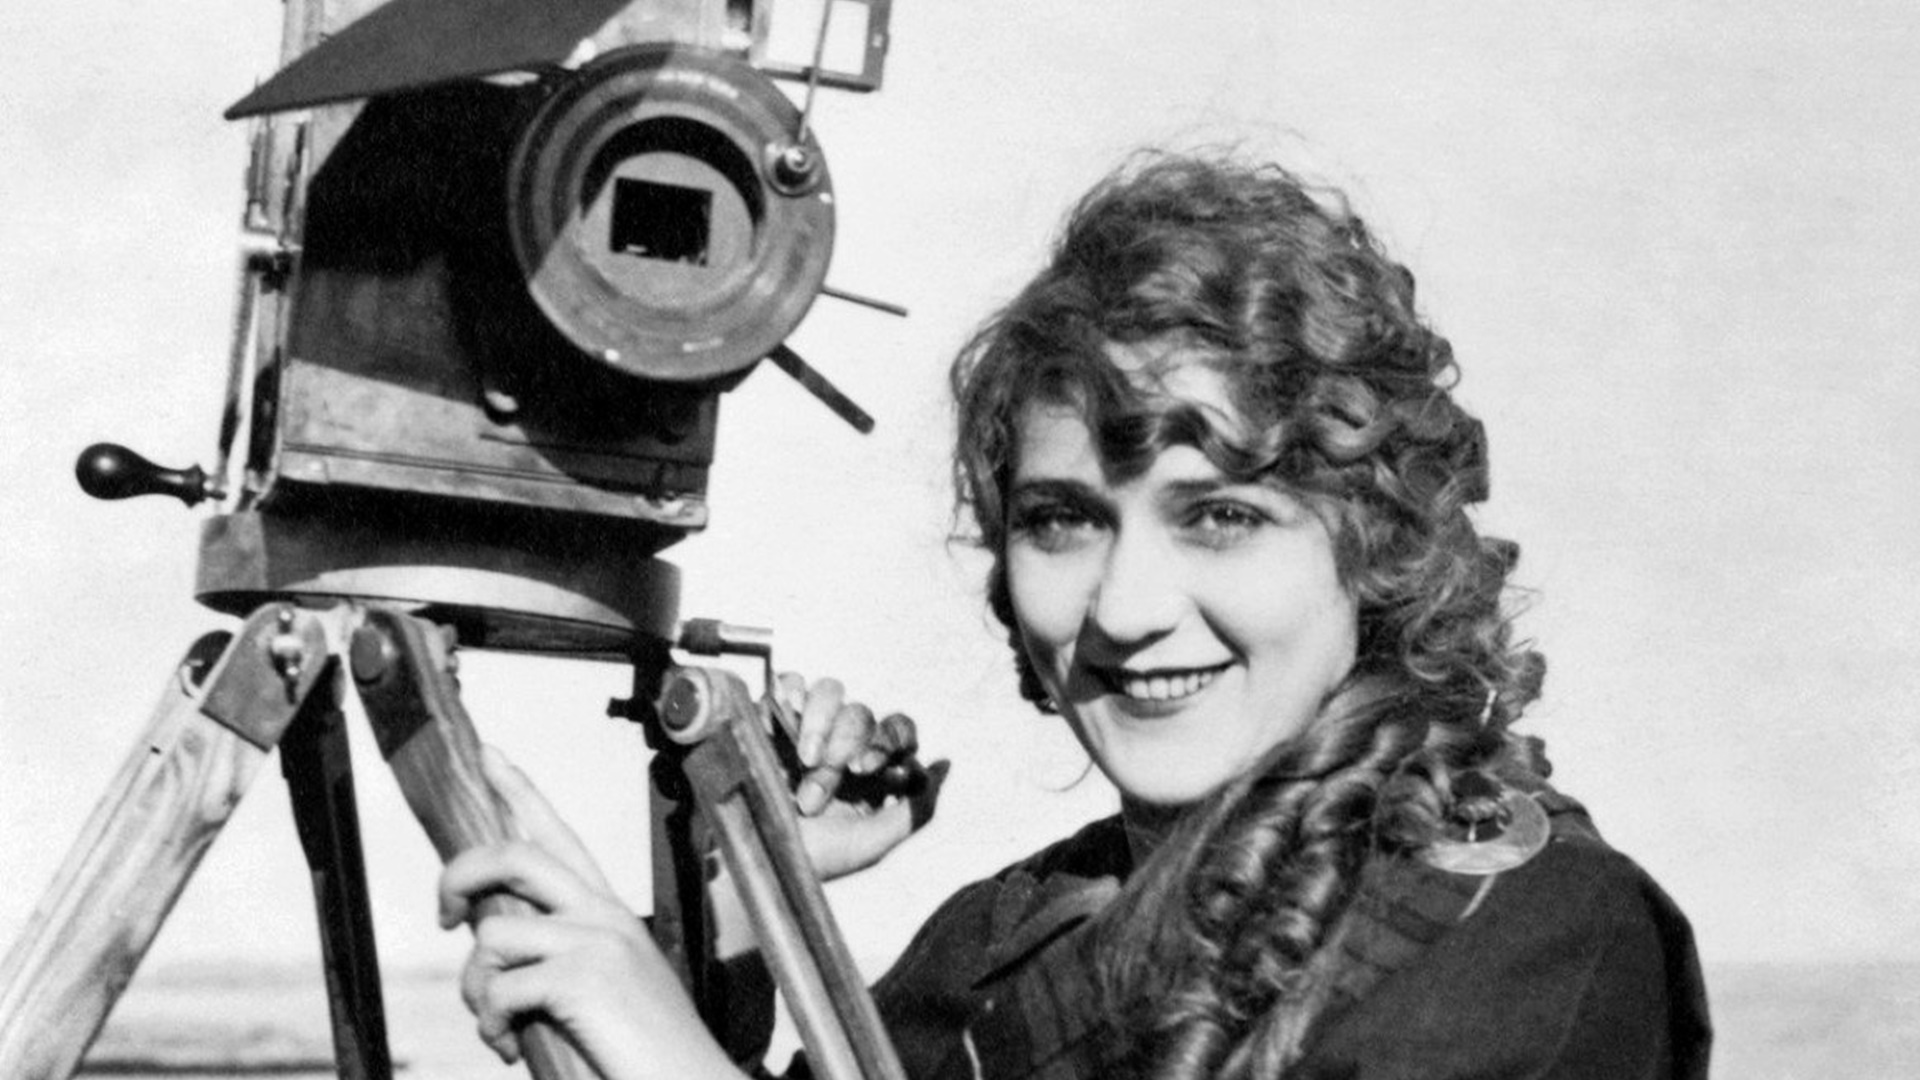 THIS IS NO GAME FOR LITTLE GIRLS? WOMEN IN THE BEGINNINGS OF CINEMATOGRAPHY.